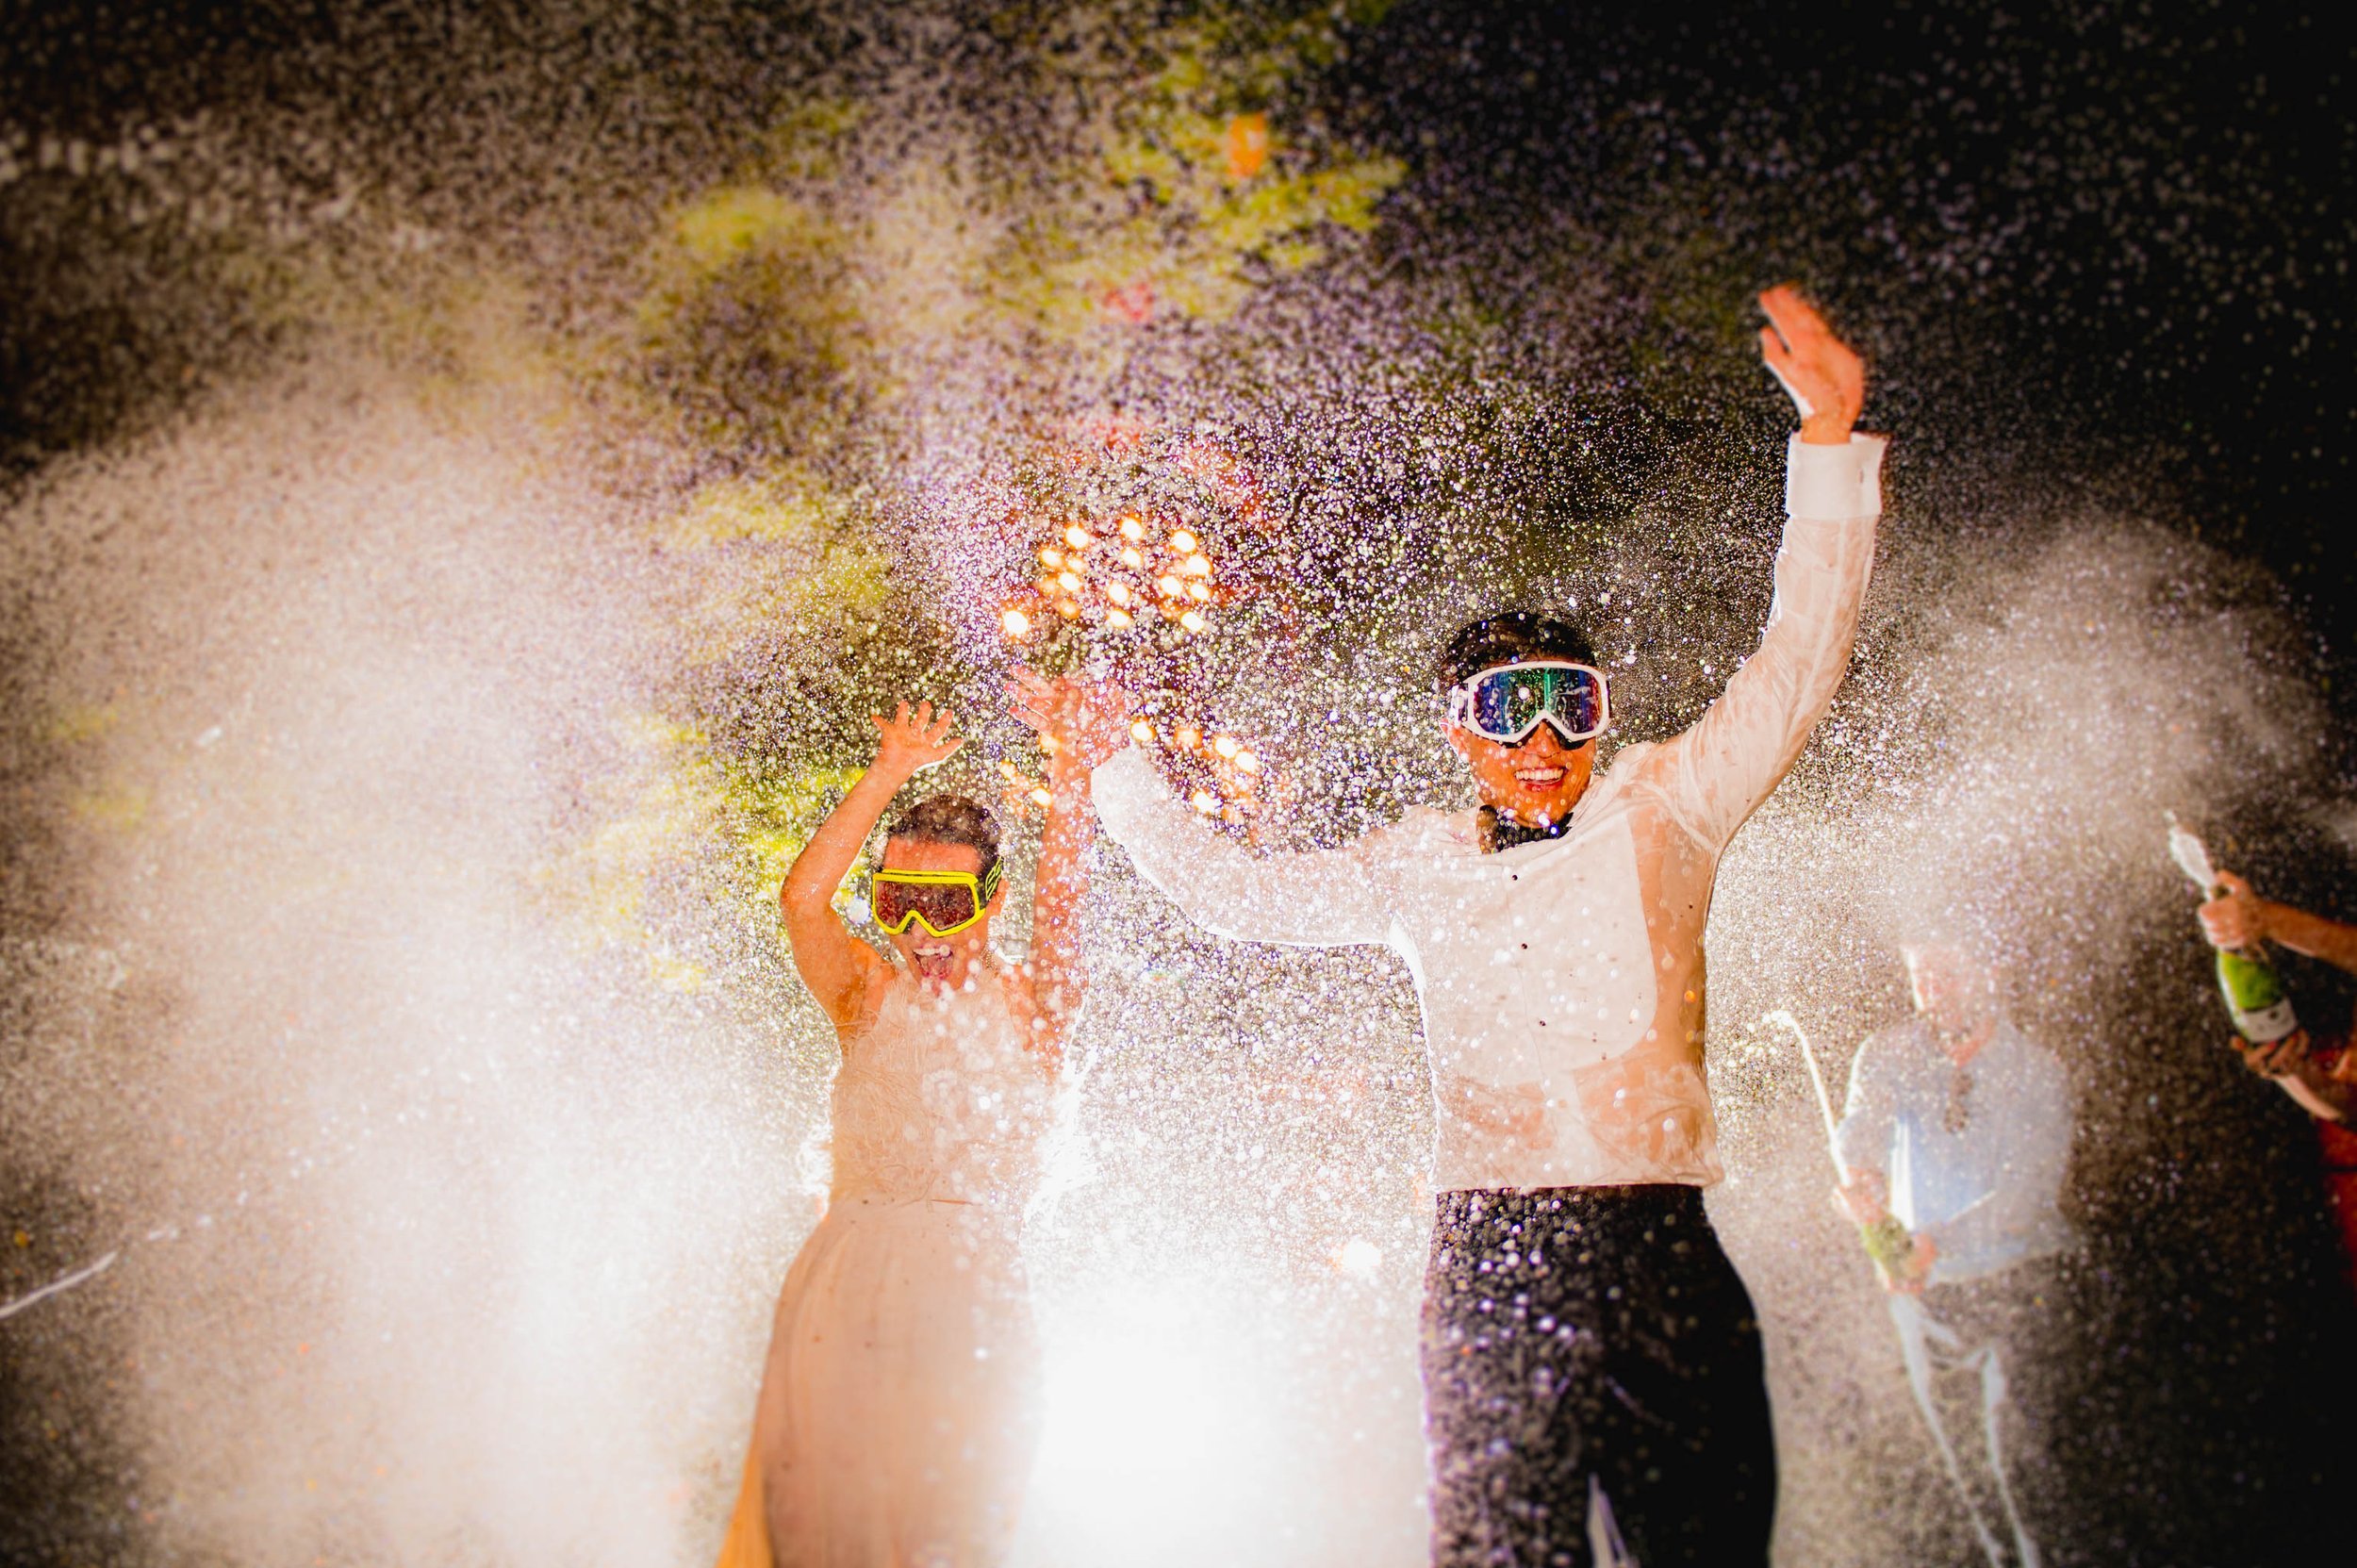 the bride and groom run through sprayed champagne as they wear ski goggle and are soaked